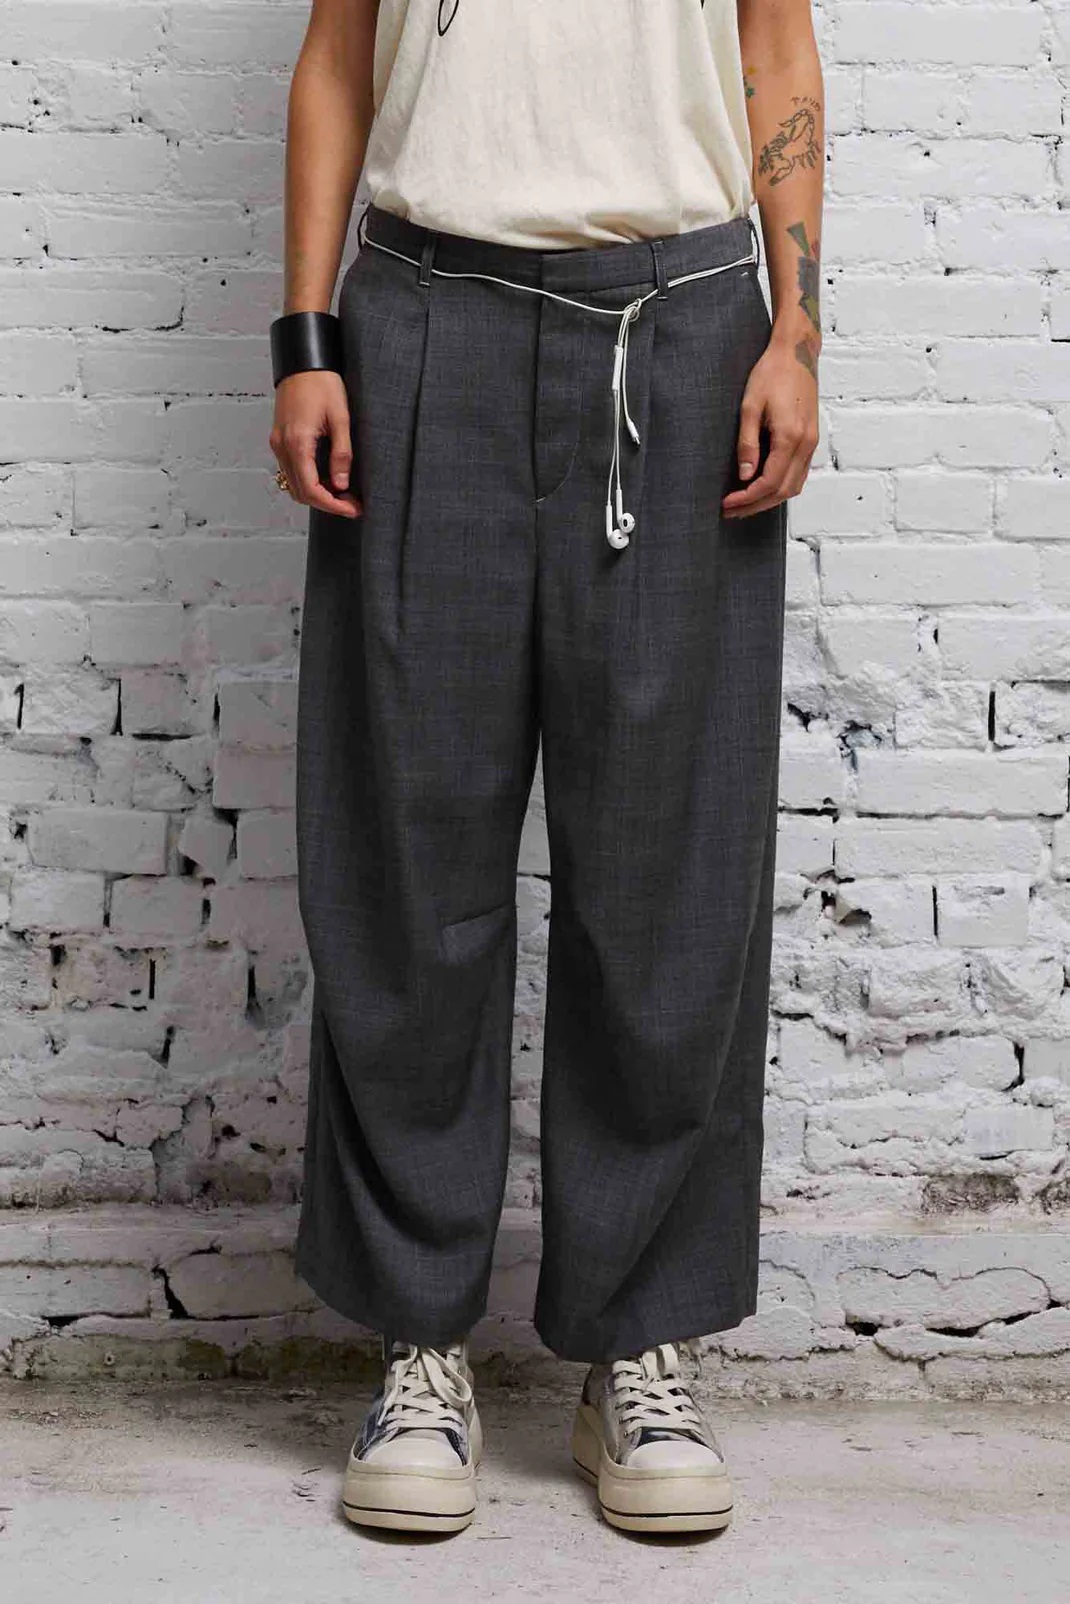 R13 Articulated Knee Trouser Grey Plaid